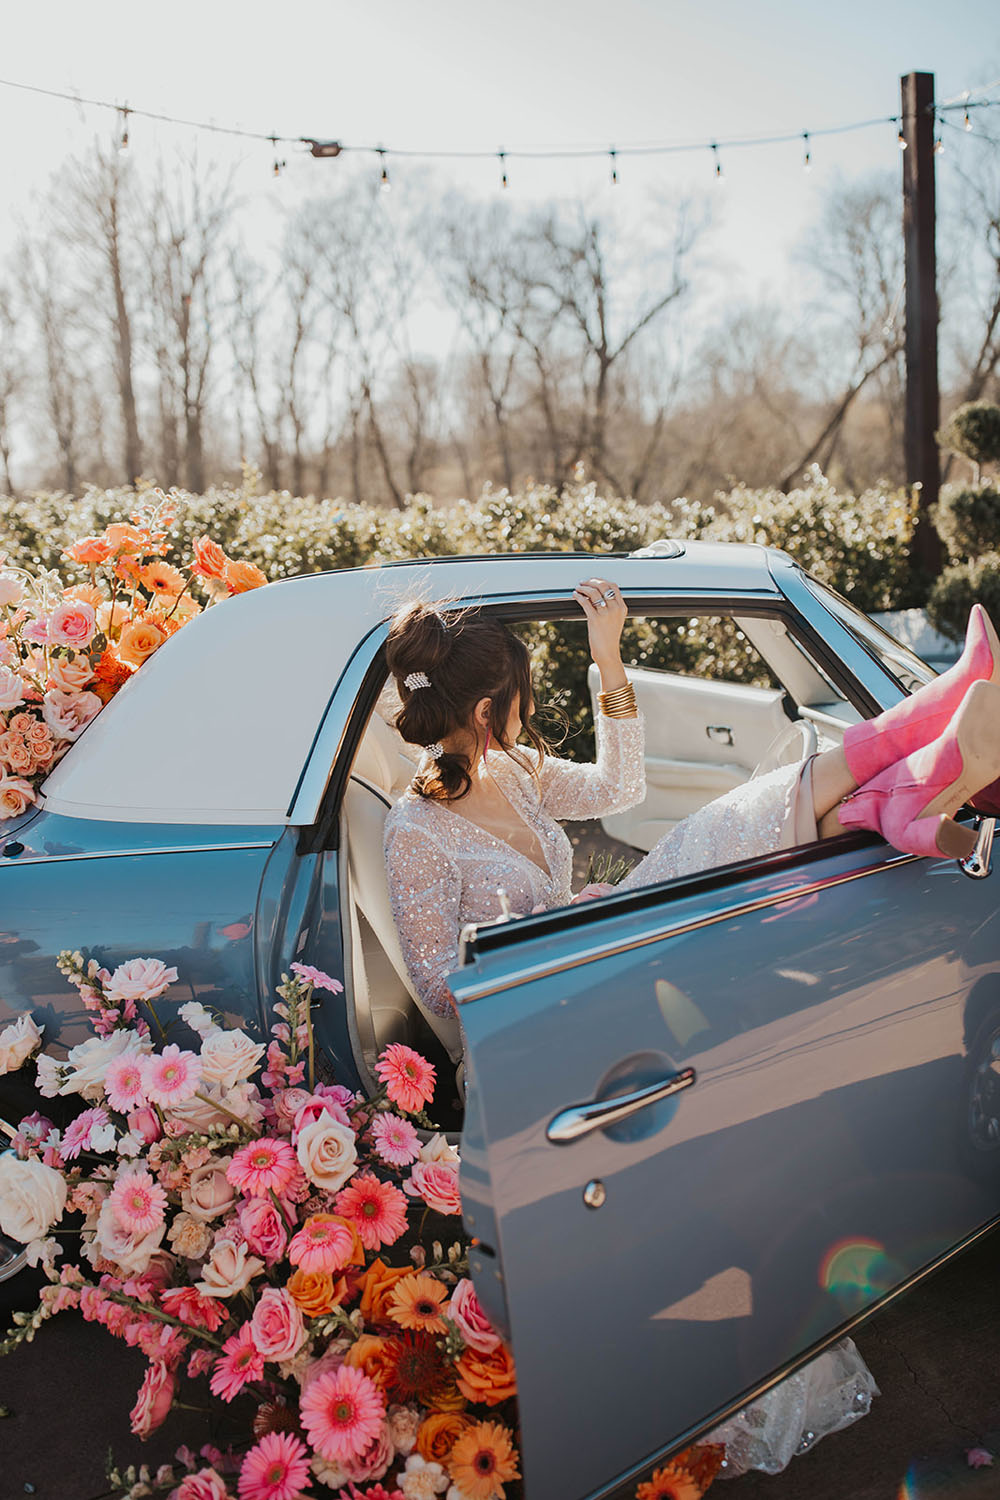 Groovy mod disco-themed wedding overflowing with flowers